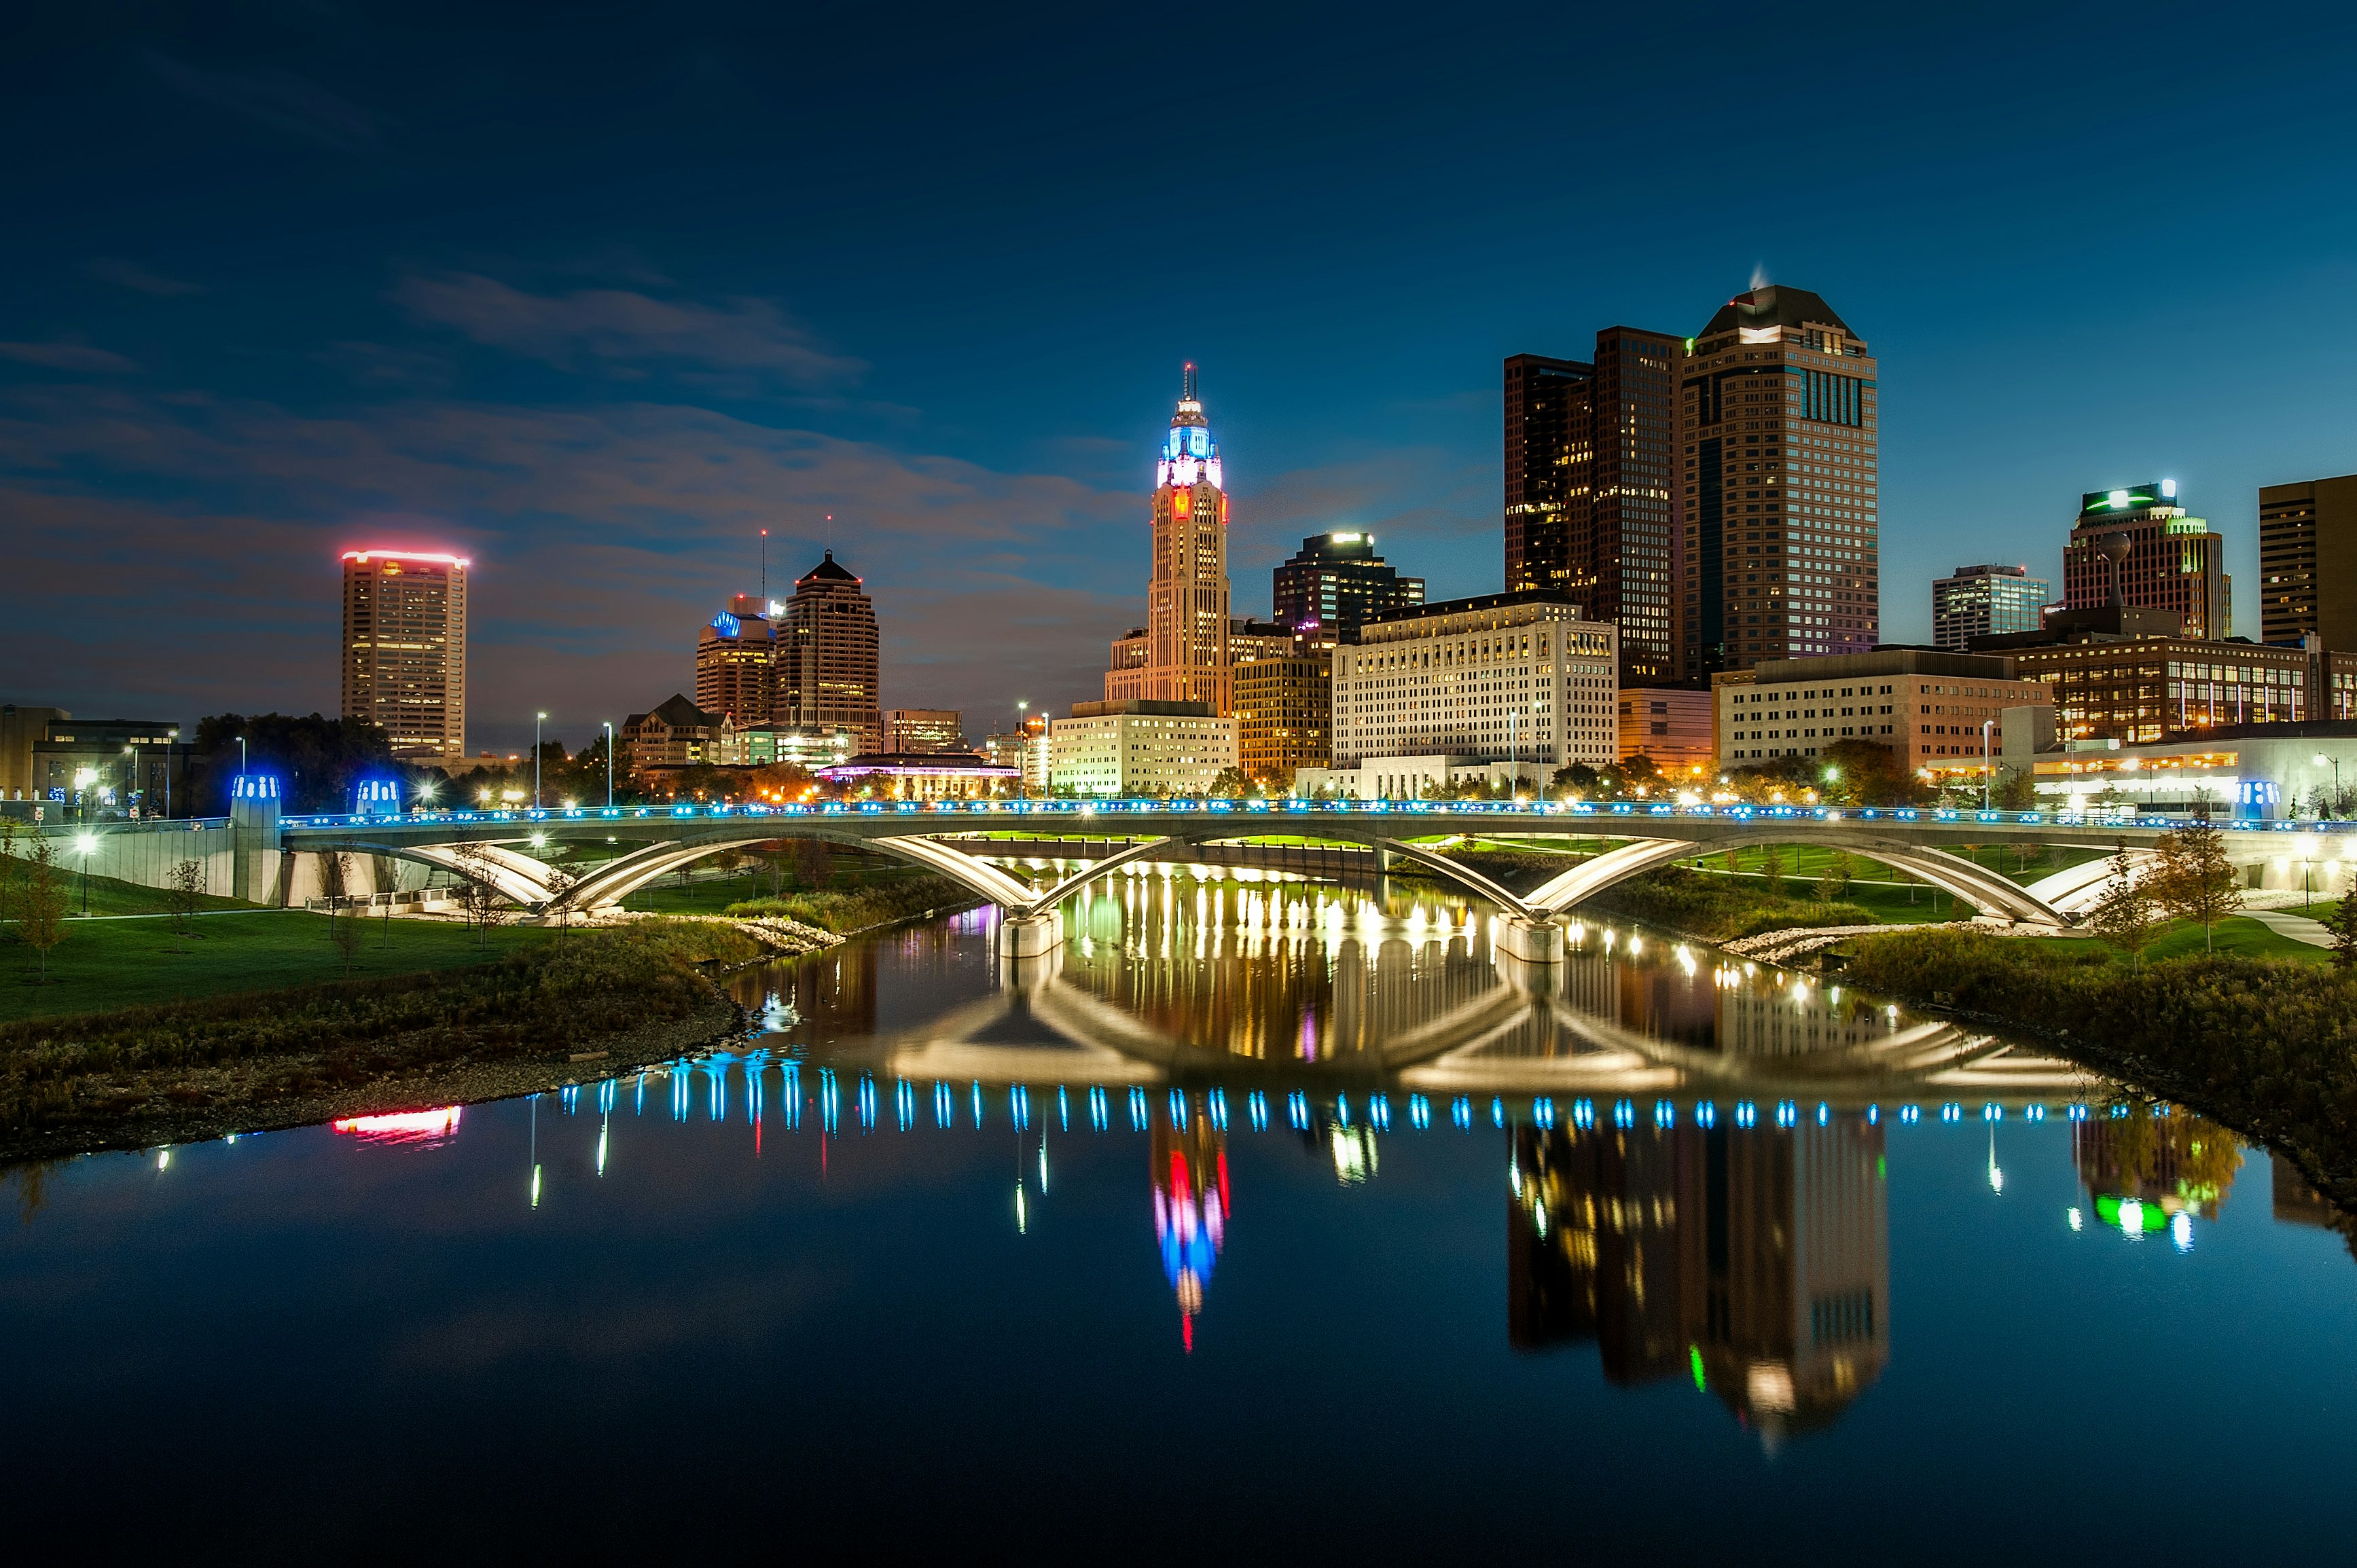 The bright city lights of downtown Columbus is mirrored in a body of water under flowing under a stone bridge